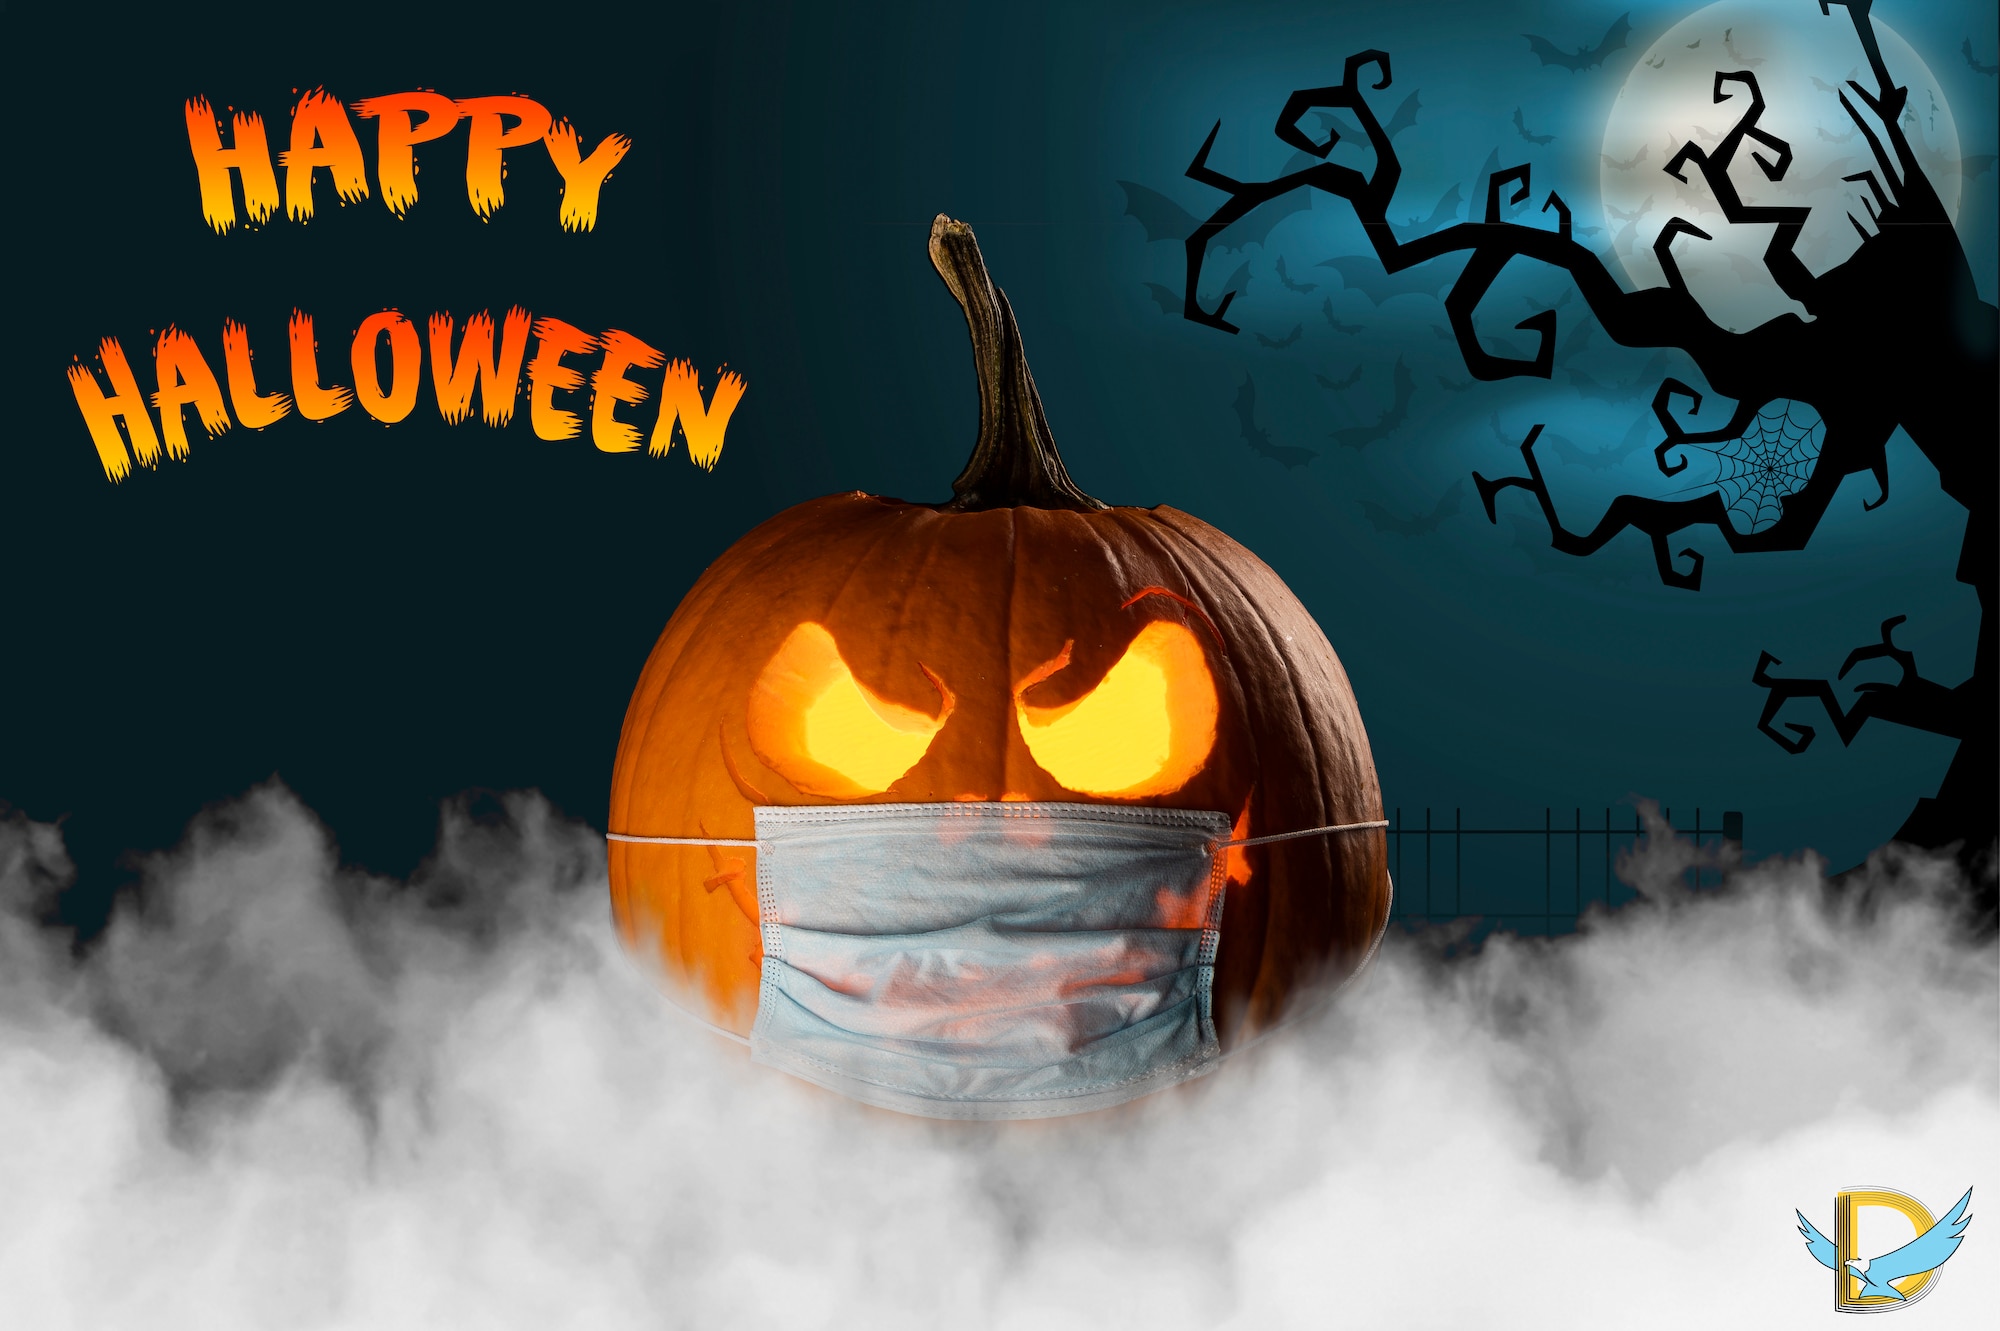 This Halloween photo illustration was created to wish everyone a safe and happy Halloween from the 436th Airlift Squadron at Dover Air Force Base, Delaware. (U.S. Air Force photo illustration by Senior Airman Christopher Quail) (This image was created by adding the Dover Air Force Base symbol to the bottom right, text was added to the top left, smoke was added to the bottom, background was added.)